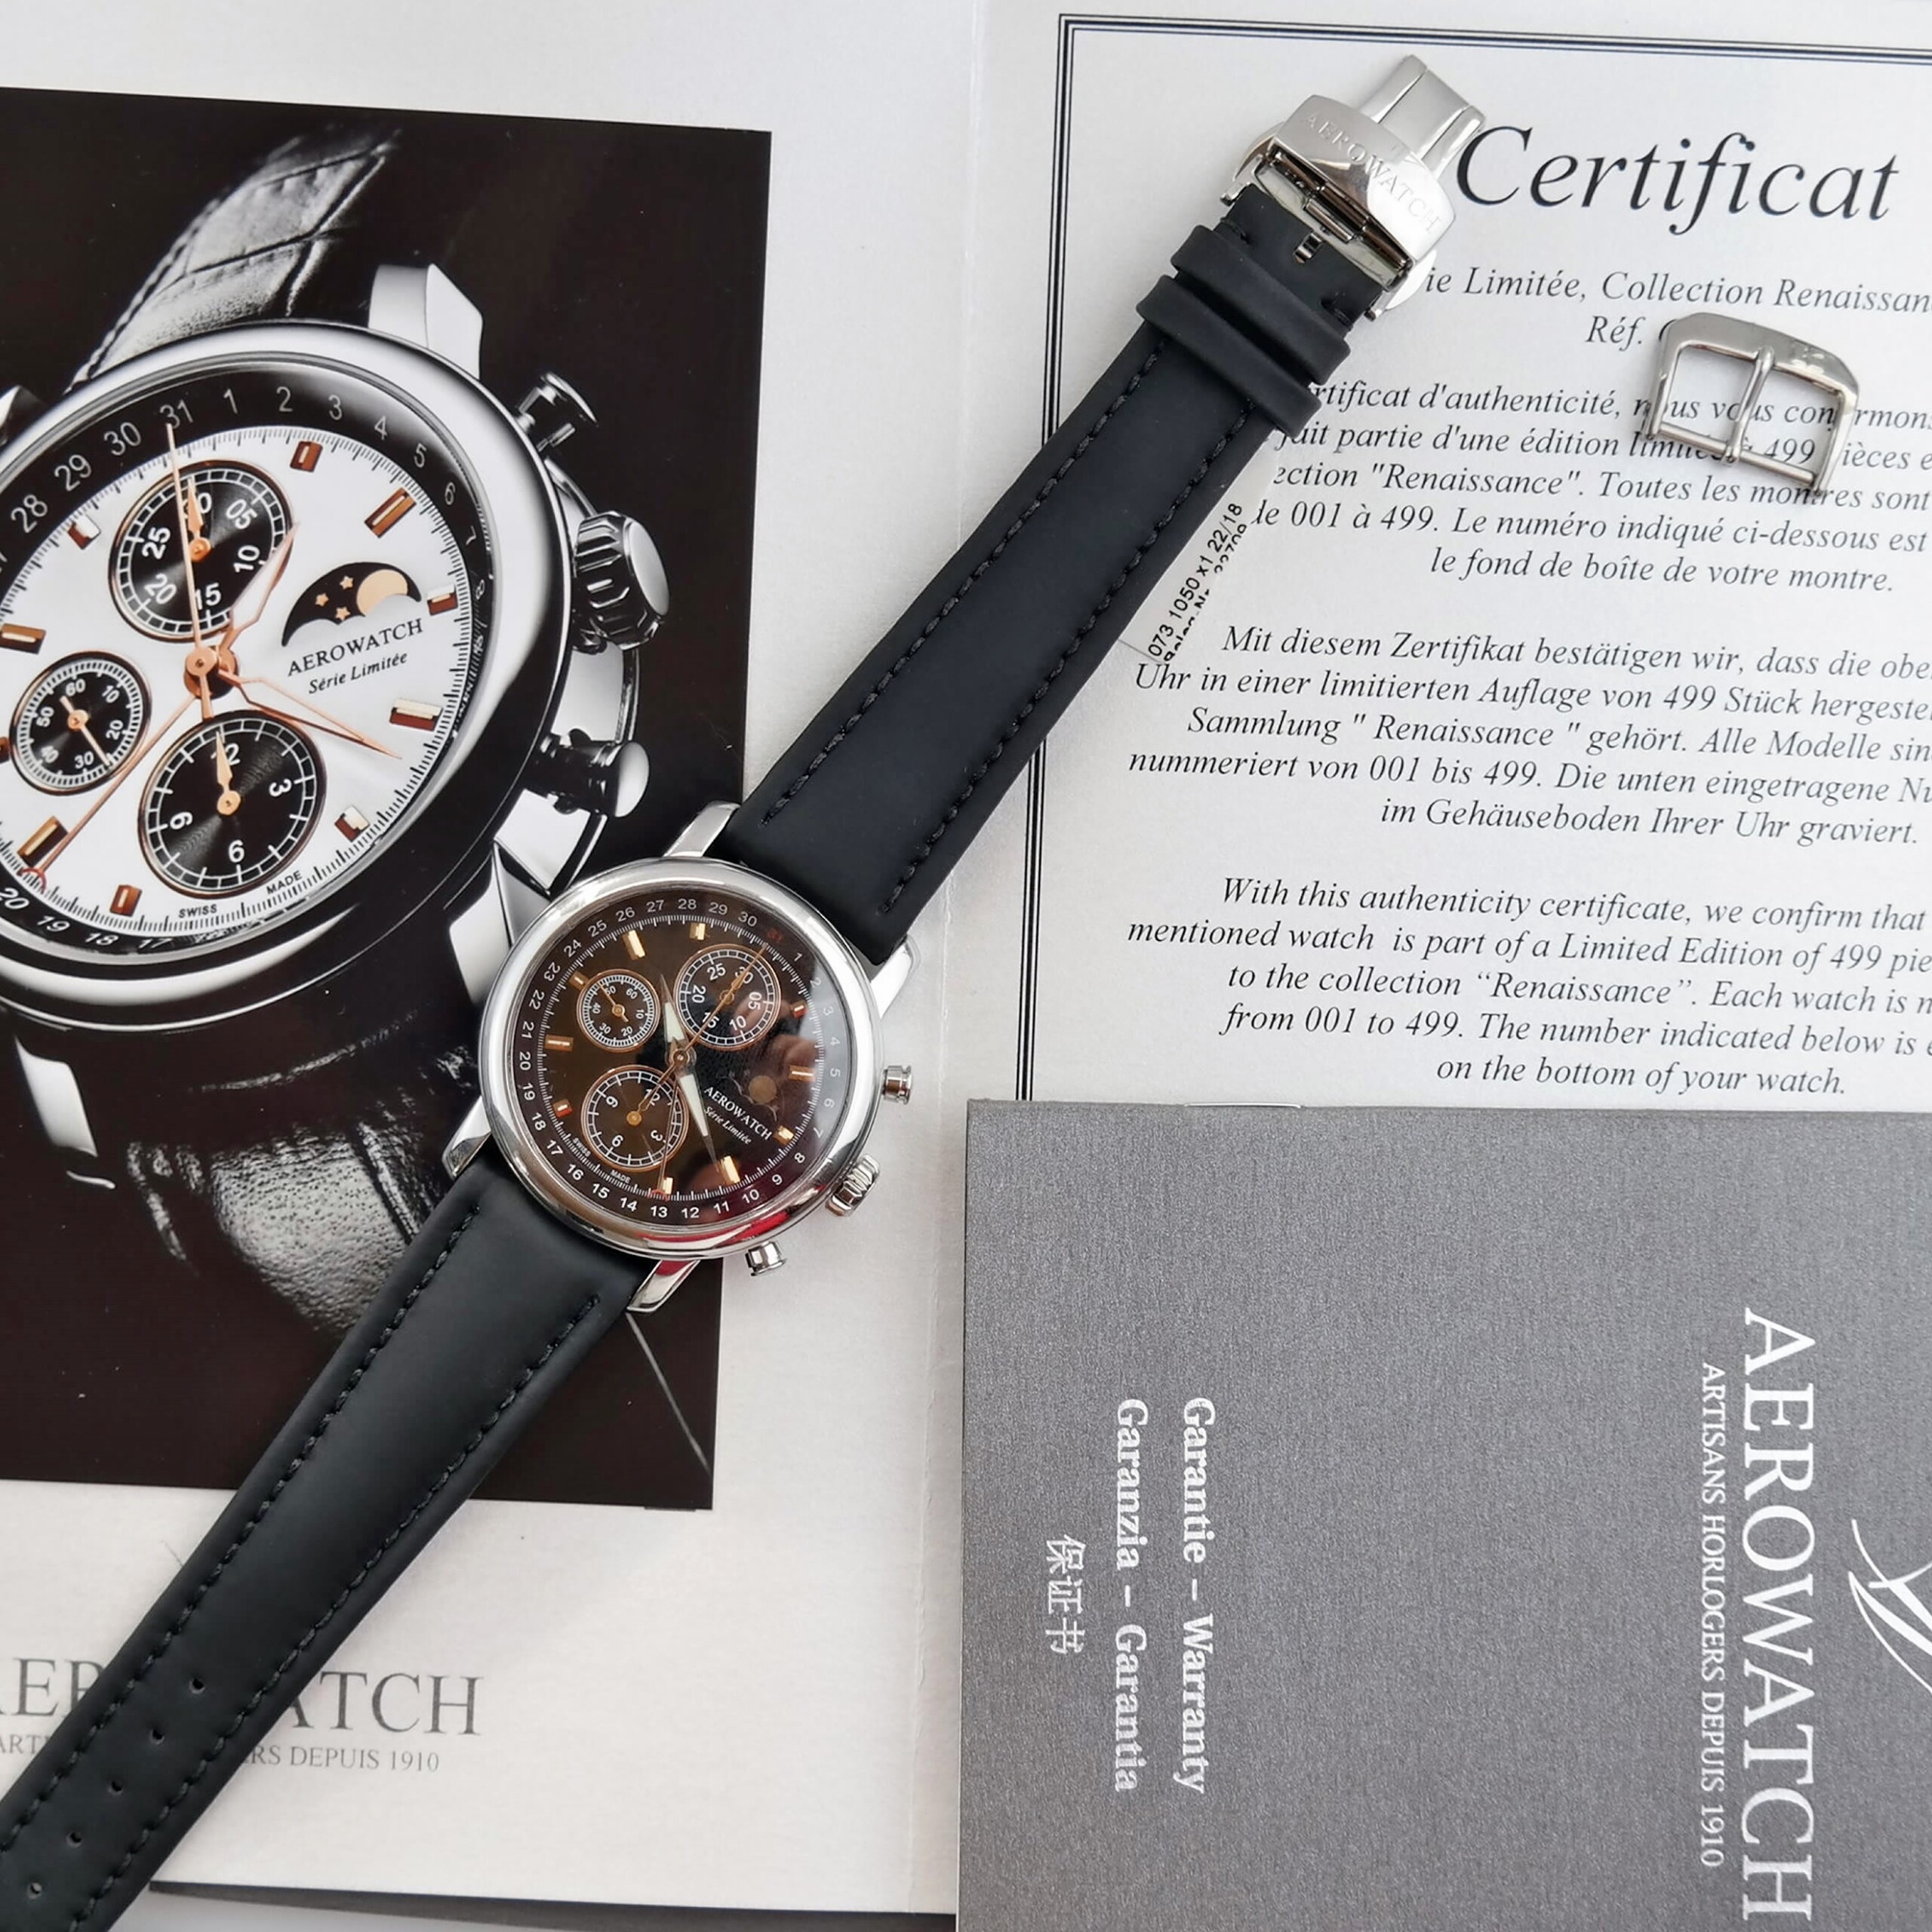 AEROWATCH - Renaissance - Cal. 7750 CCL3H Chronograph Moon-Phases Swiss Watch